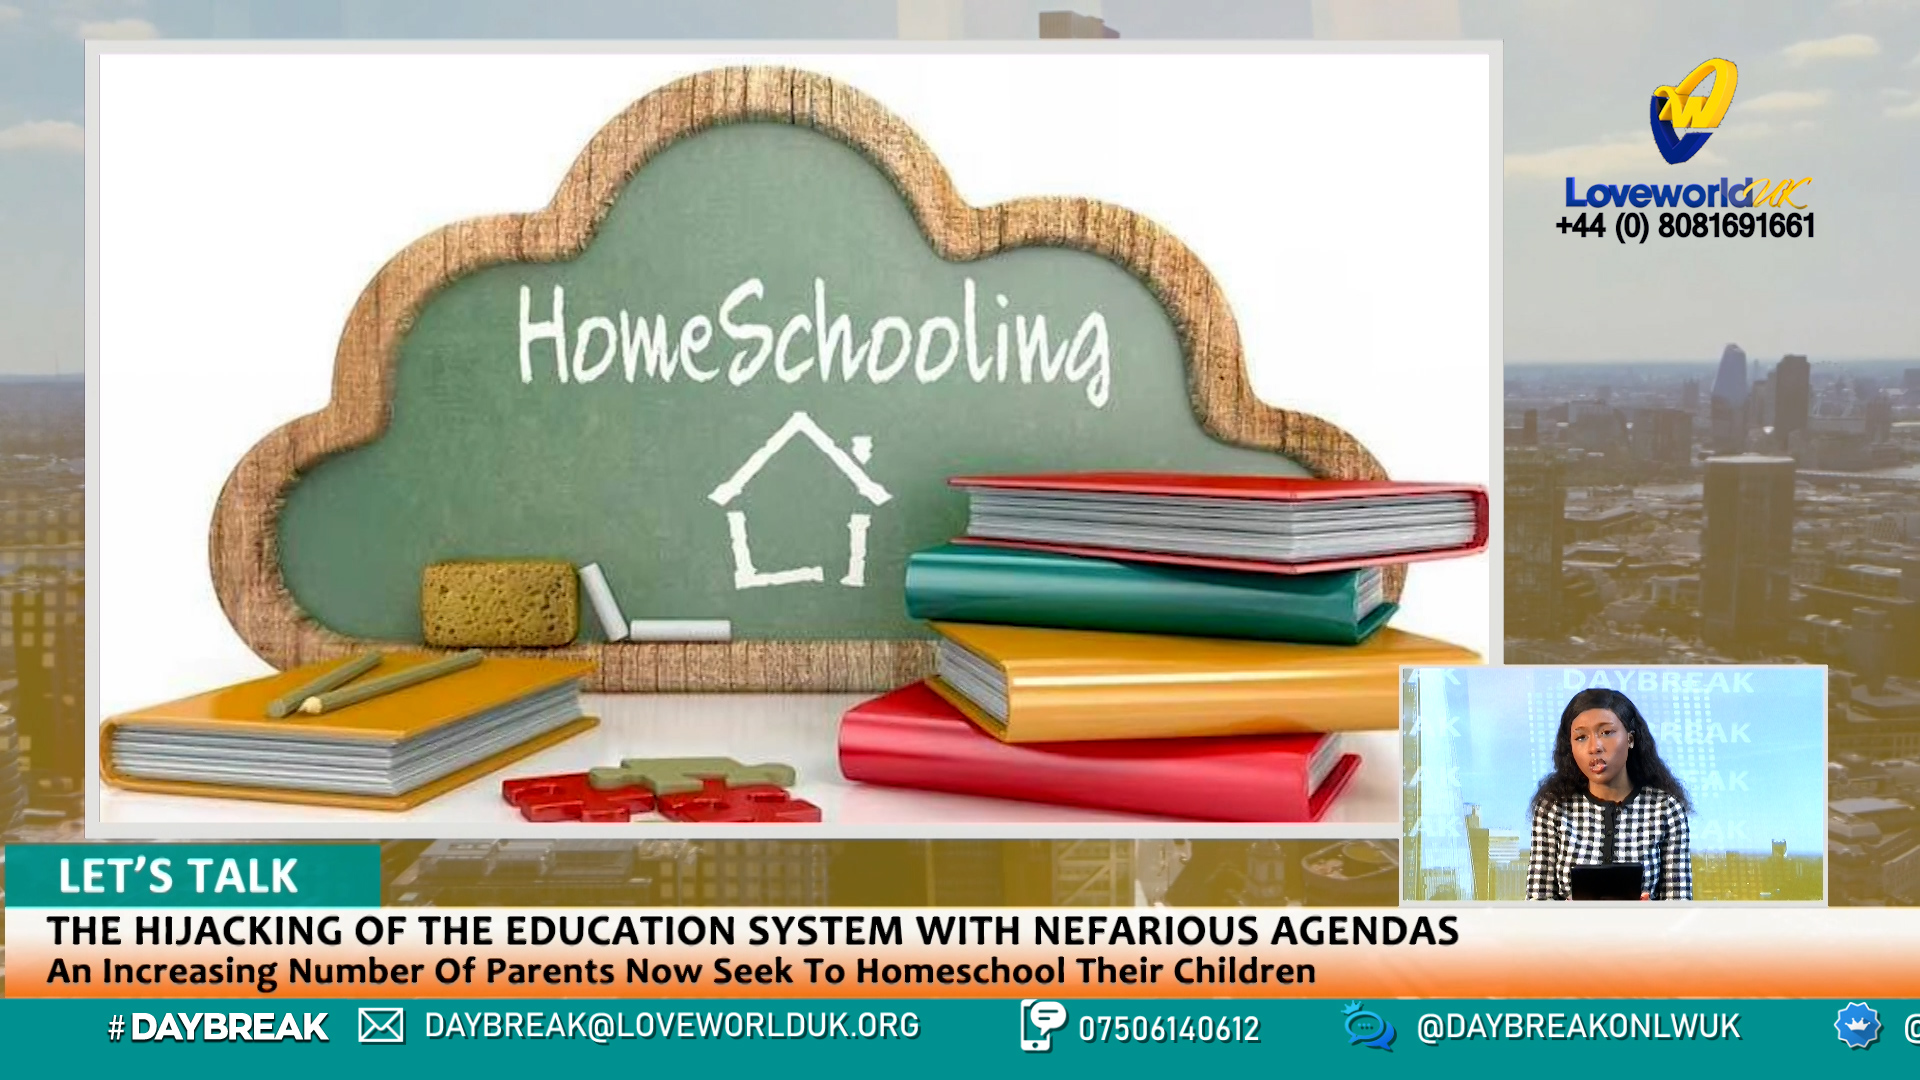 EP 7 - THE HIJACKING OF THE EDUCATION SYSTEM WITH NEFARIOUS AGENDAS - An Increasing Number Of Parents Now Seek To Homeschool Their Children